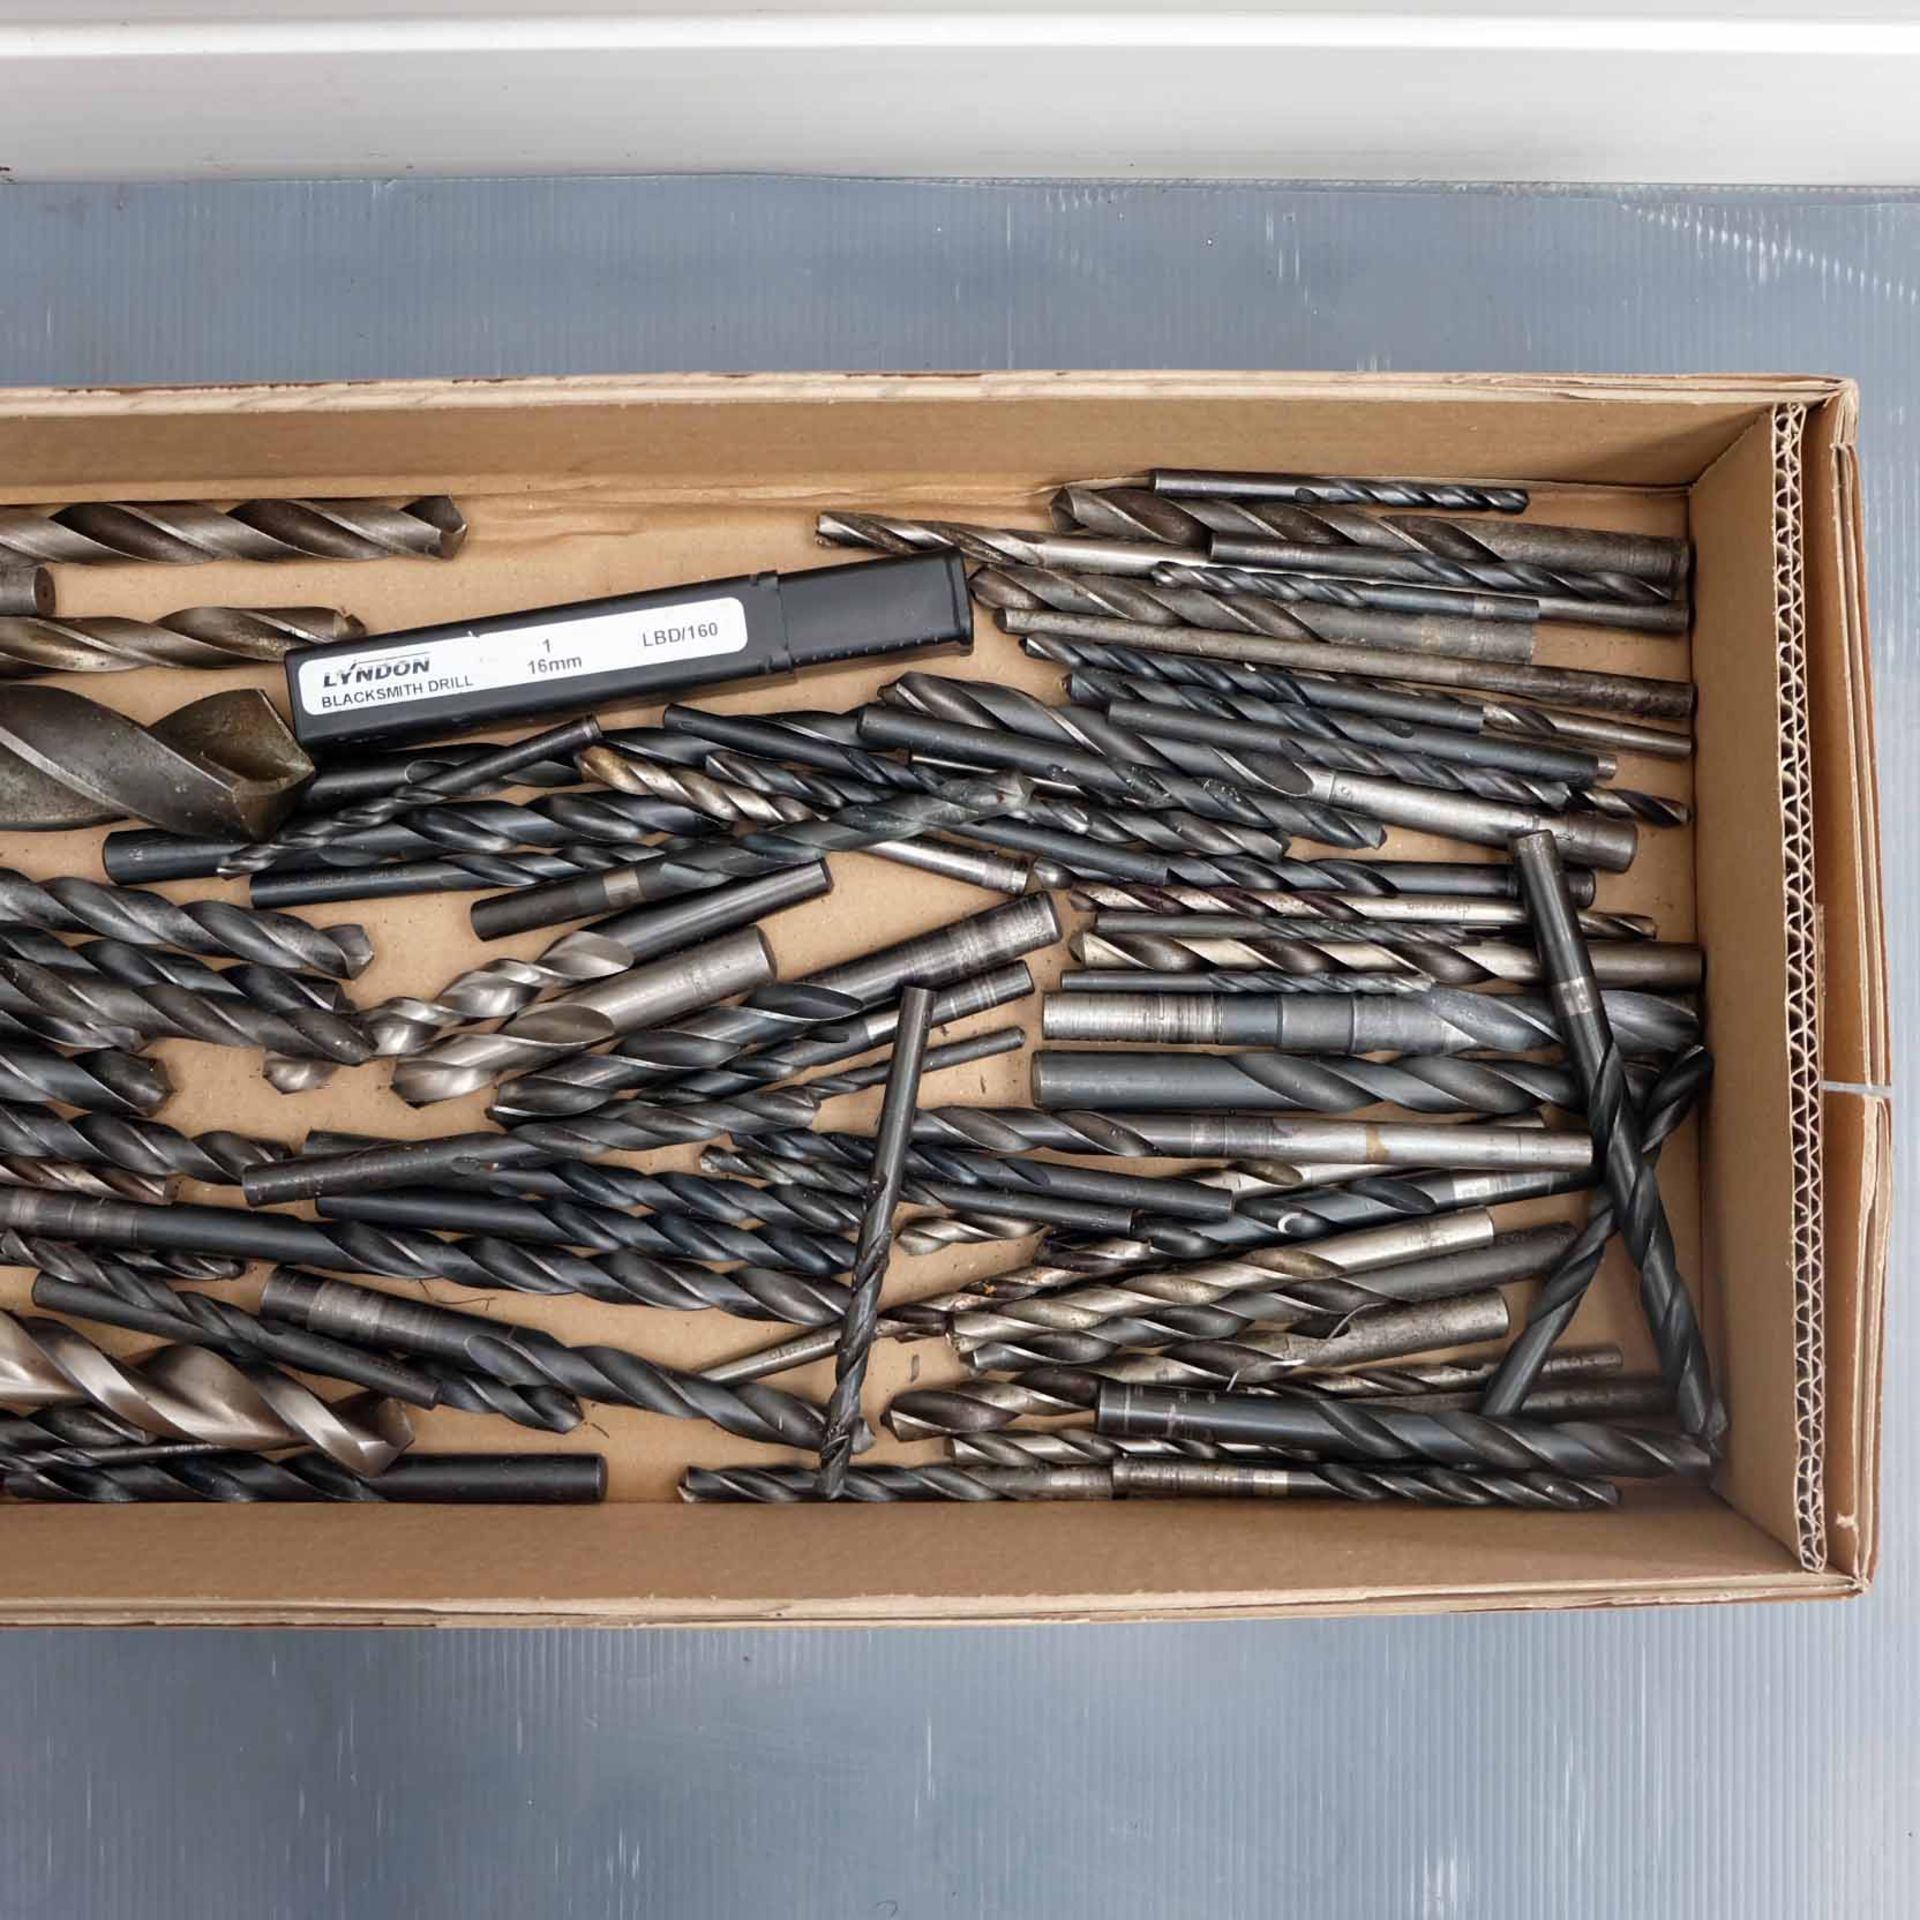 Quantity of Straight Shank Twist Drills. Various Sizes. - Image 3 of 3